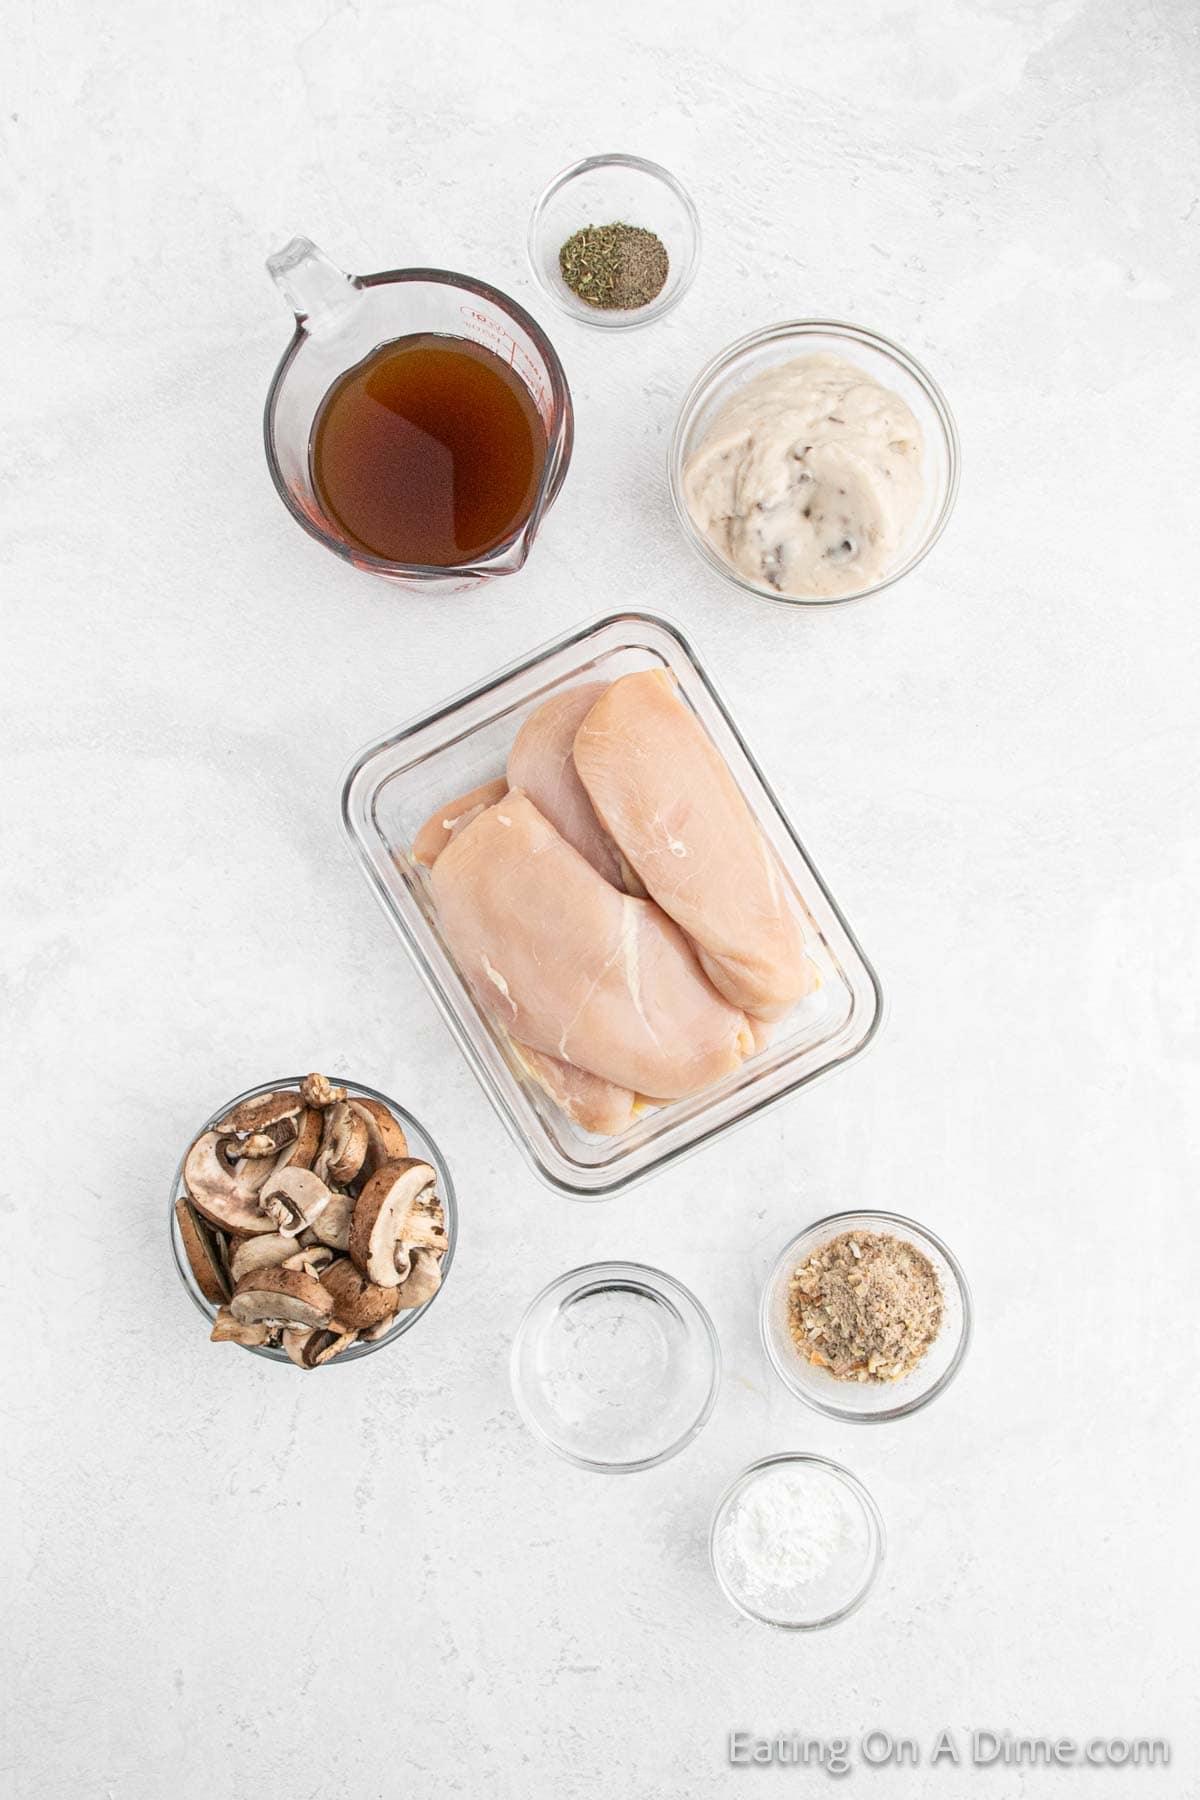 Ingredients - Chicken Breasts, cream of mushroom soup, mushrooms, onion soup mix, chicken broth, thyme leaves, pepper, cornstarch, water